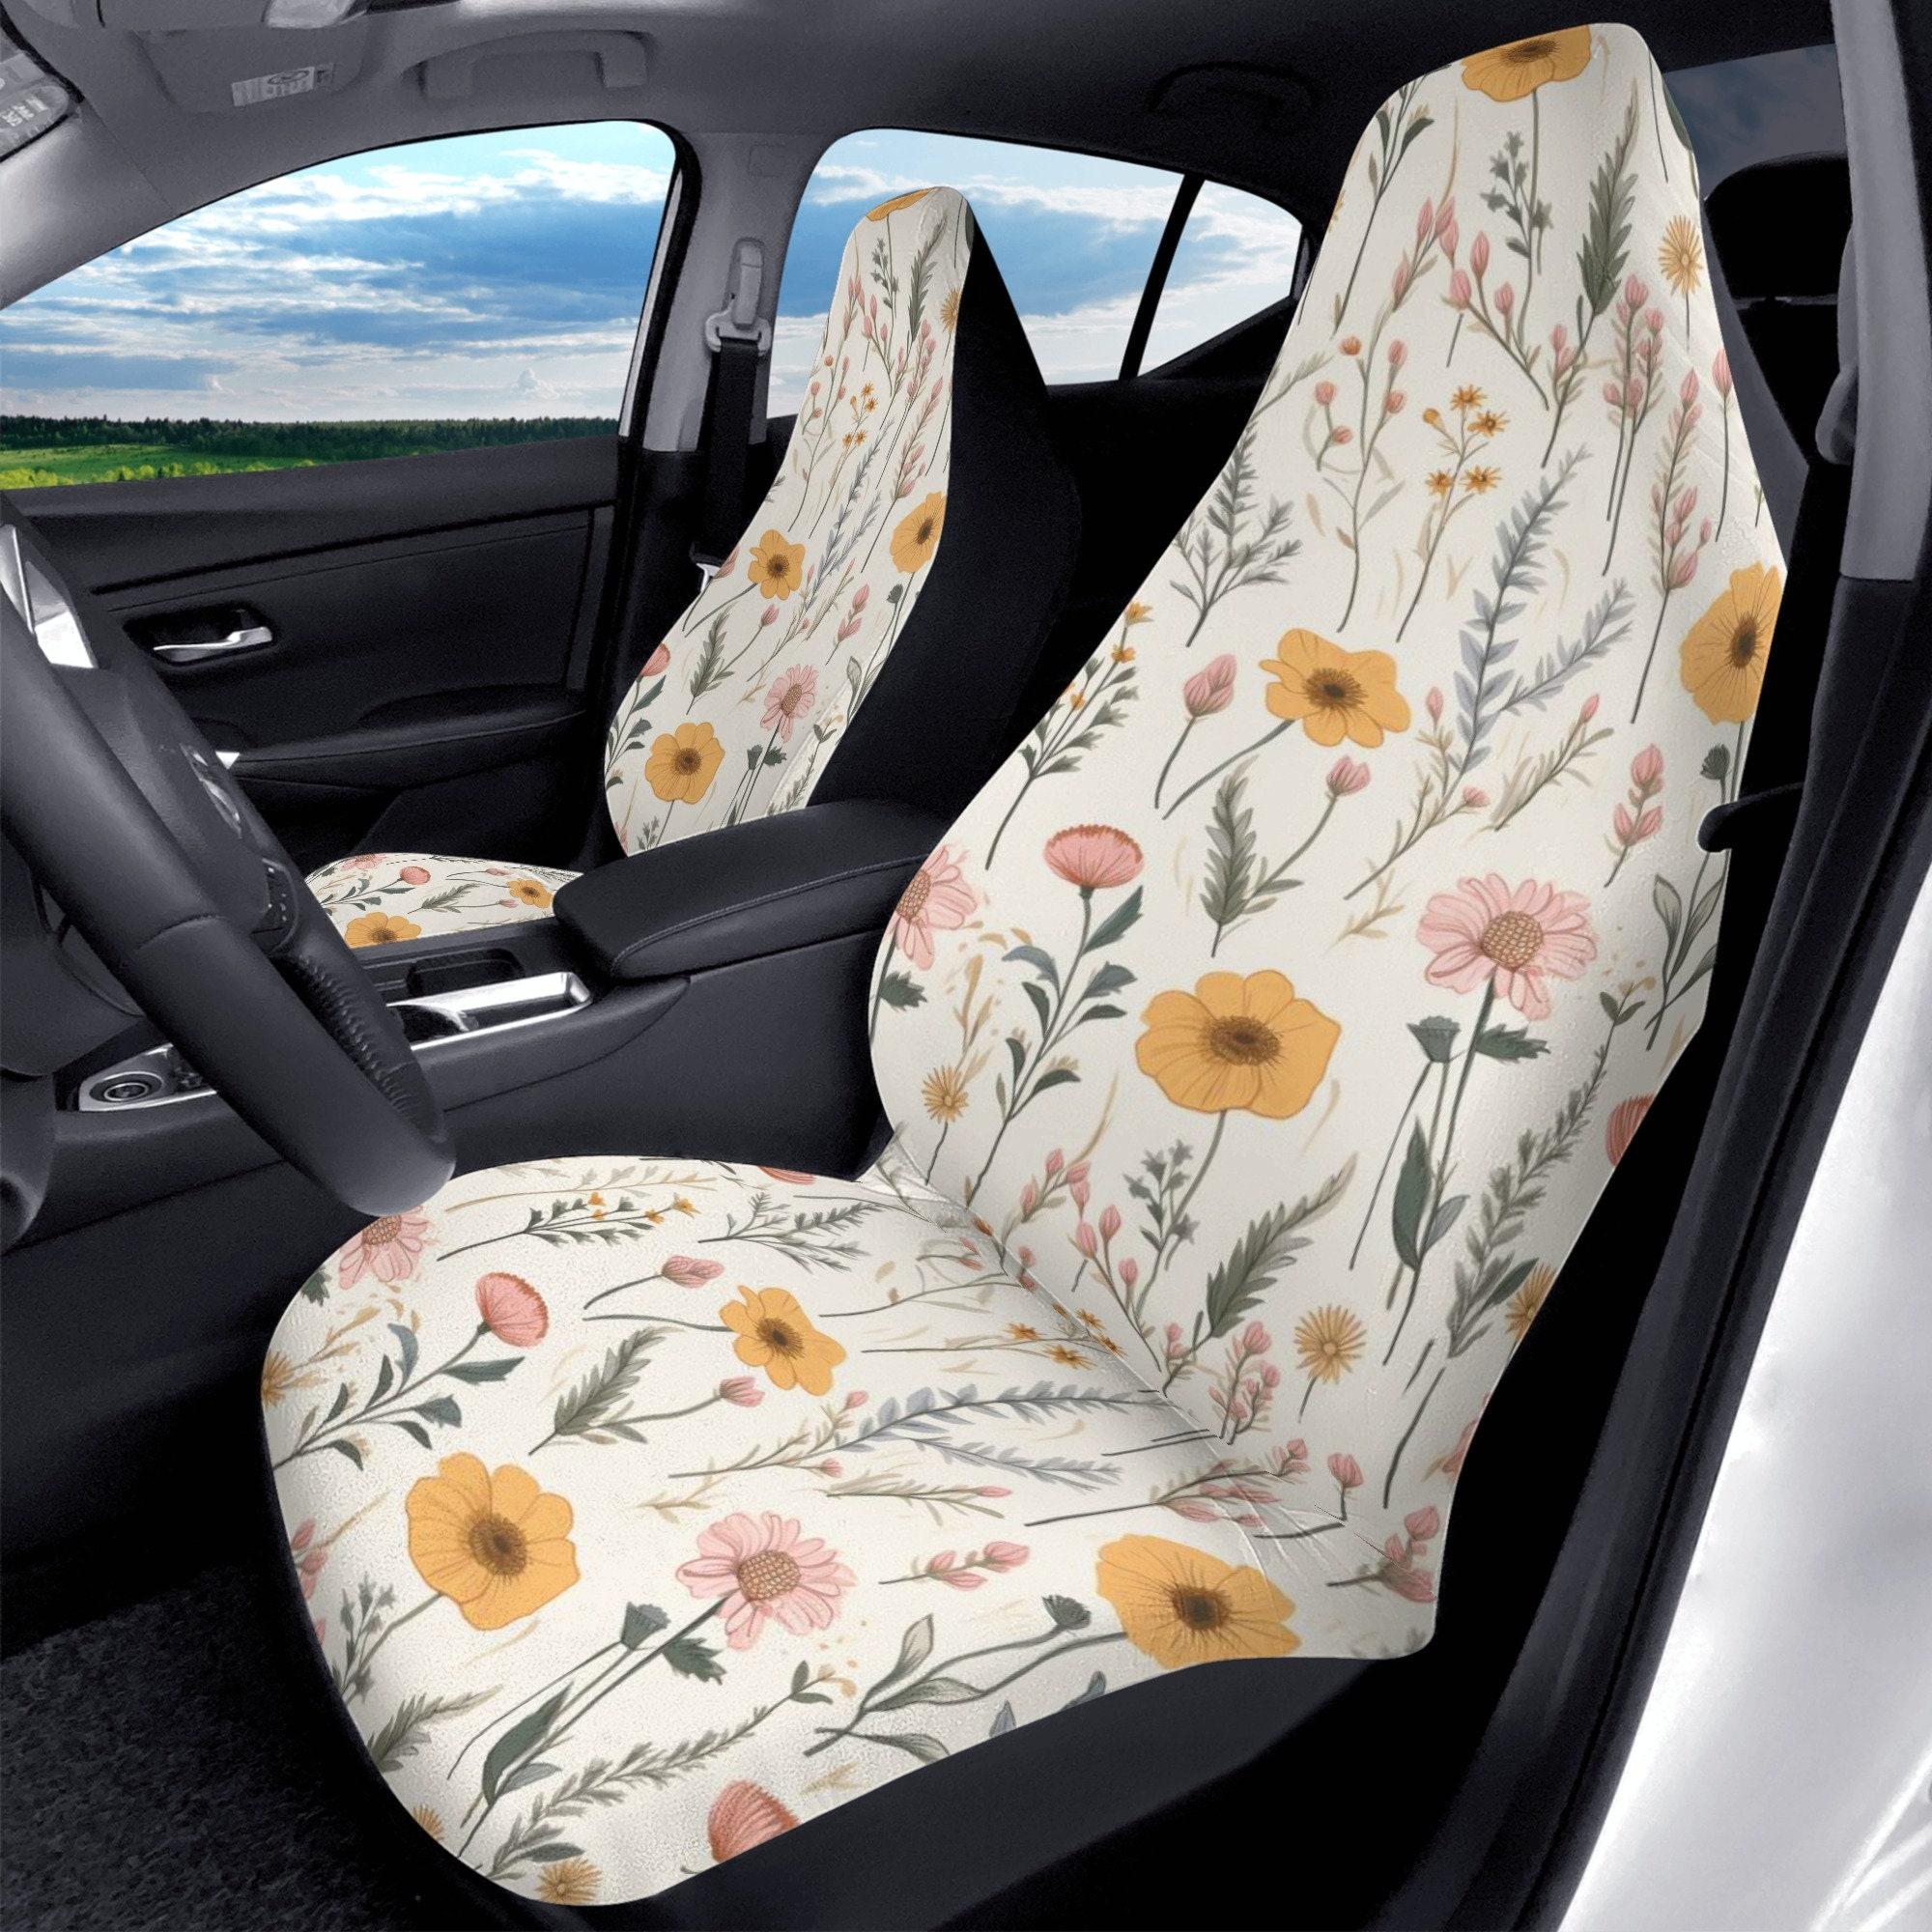 Car Seat Covers, Boho Butterfly Cute Car Accessories for Women